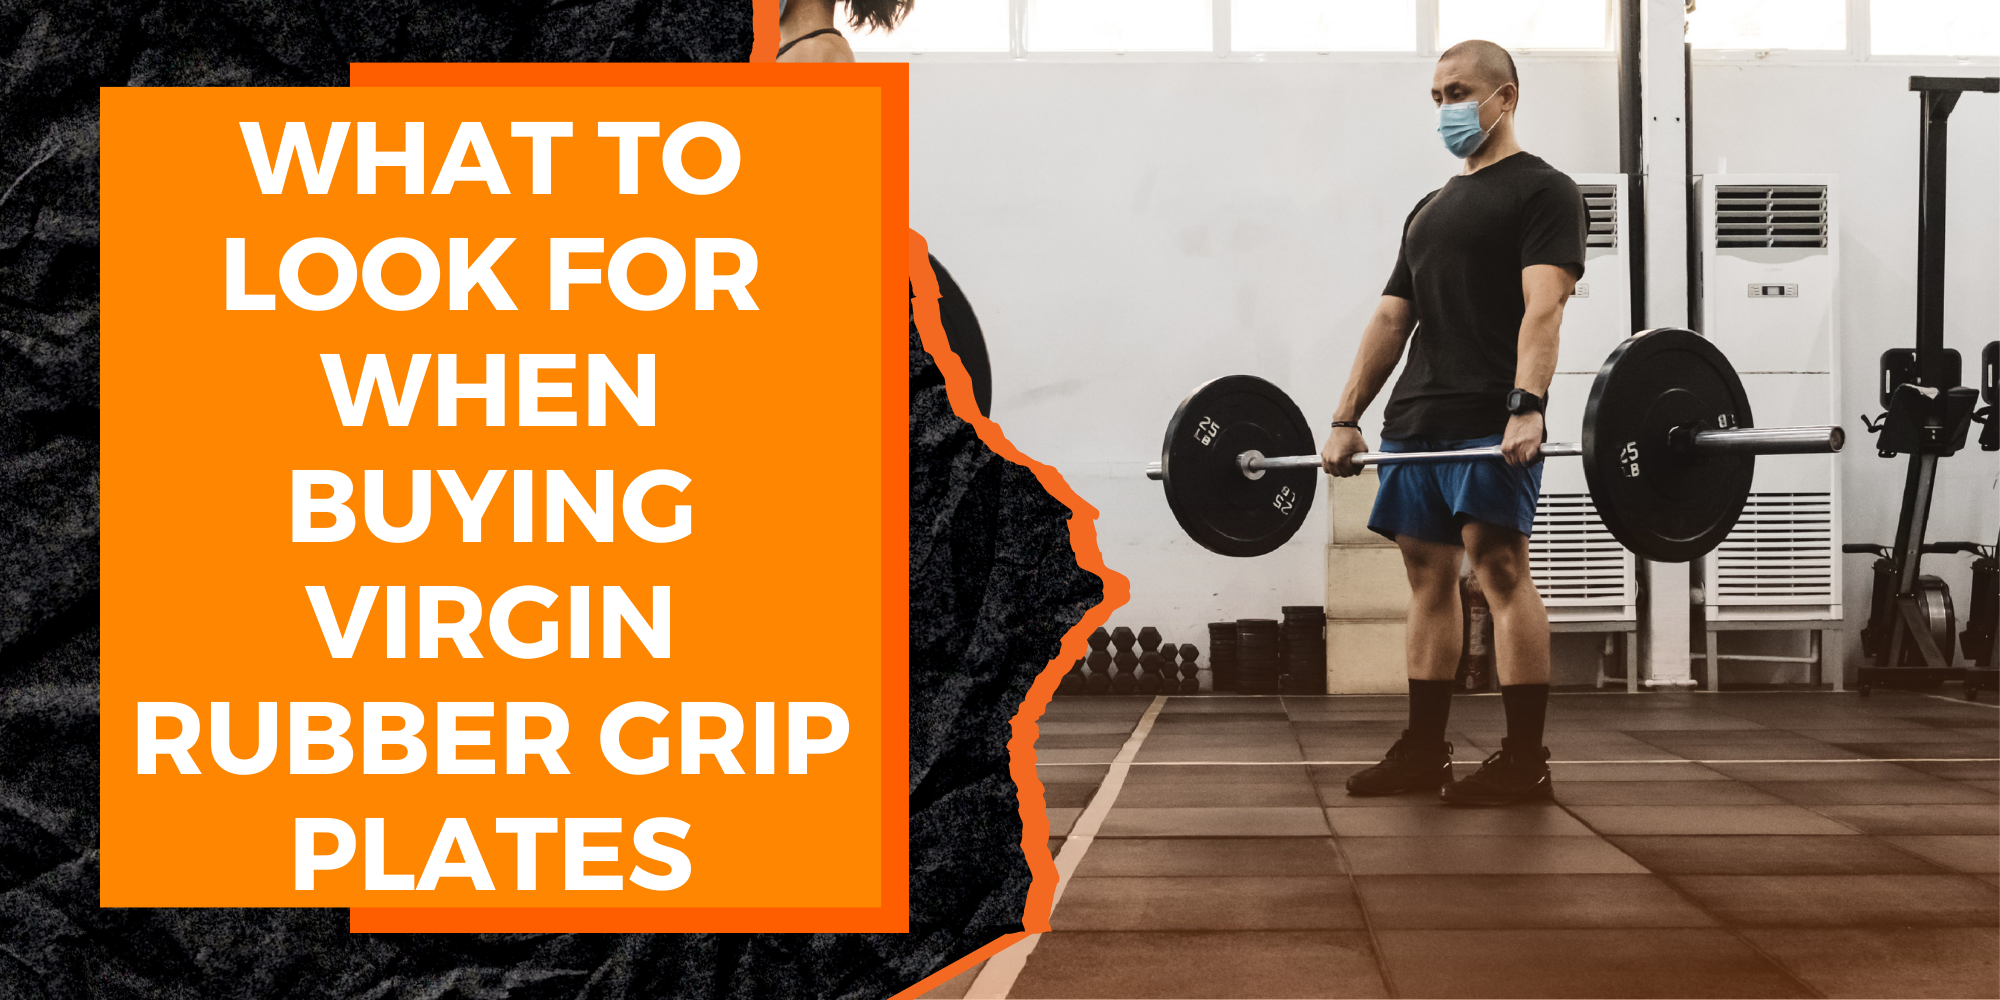 What to Look for When Buying Virgin Rubber Grip Plates